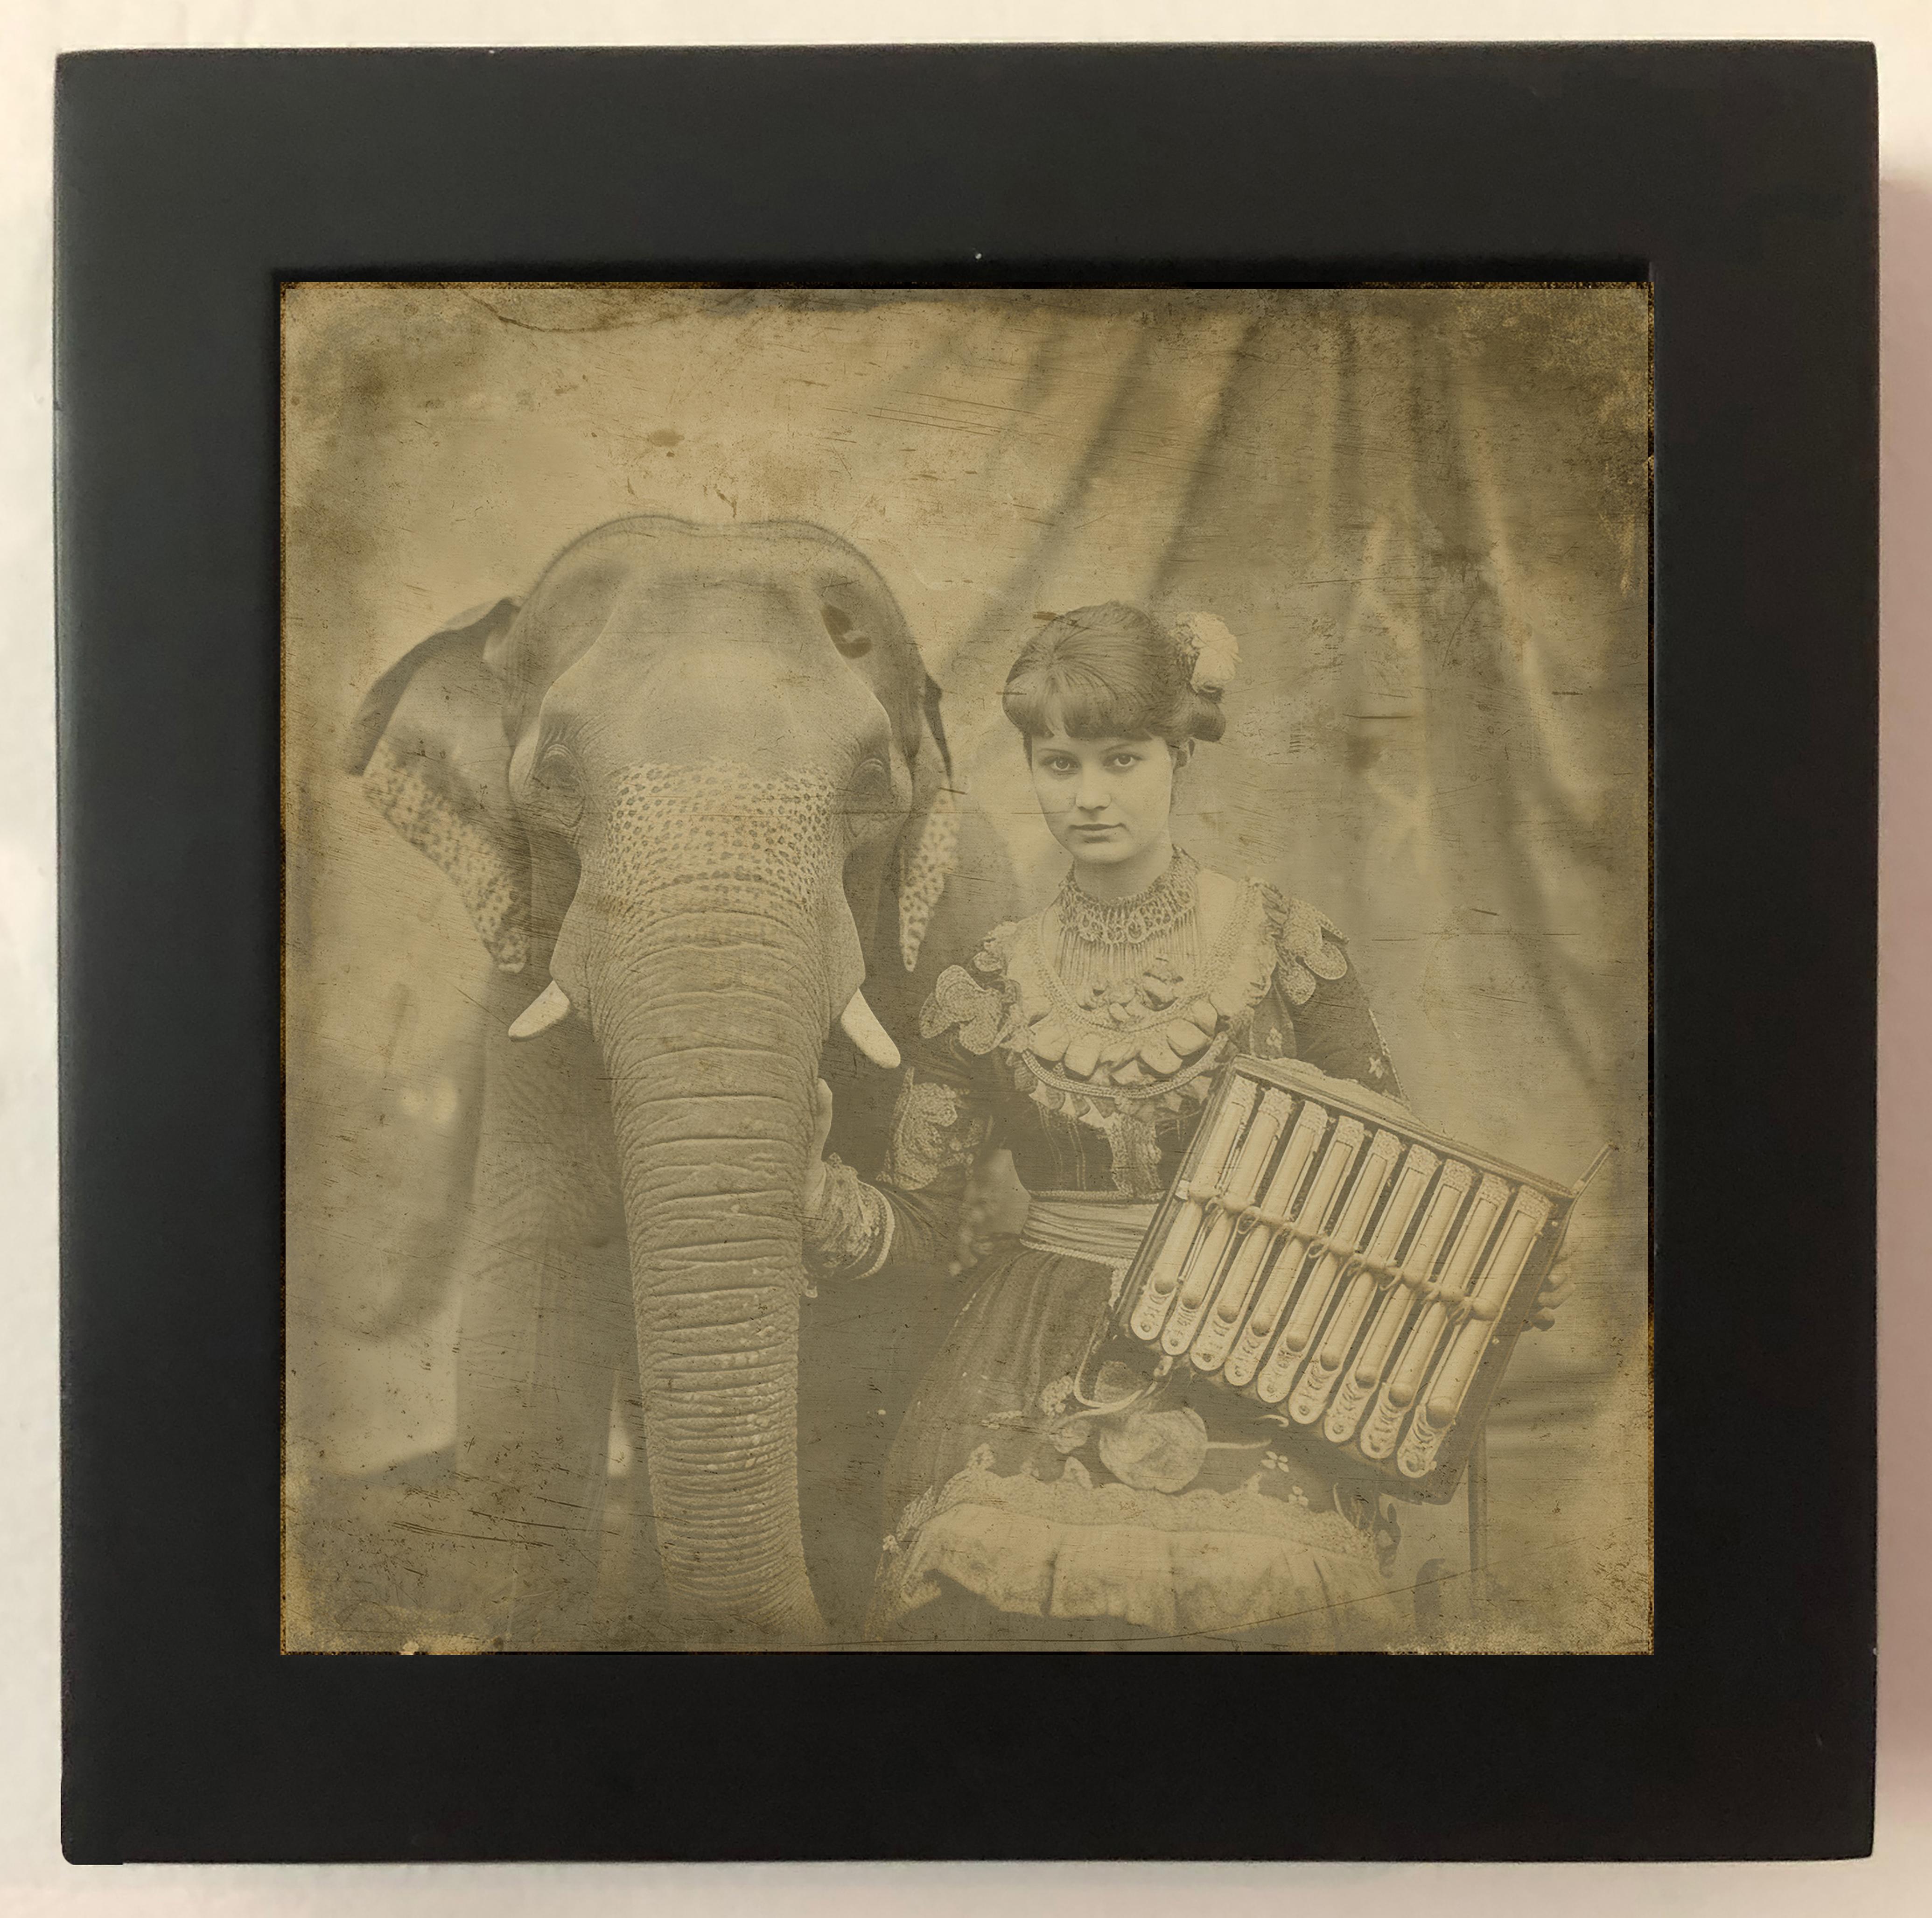 FPA Francis Pavy Artist Figurative Photograph - Eliese and her talking elephant =xotic daguerreotype reproduction Framed